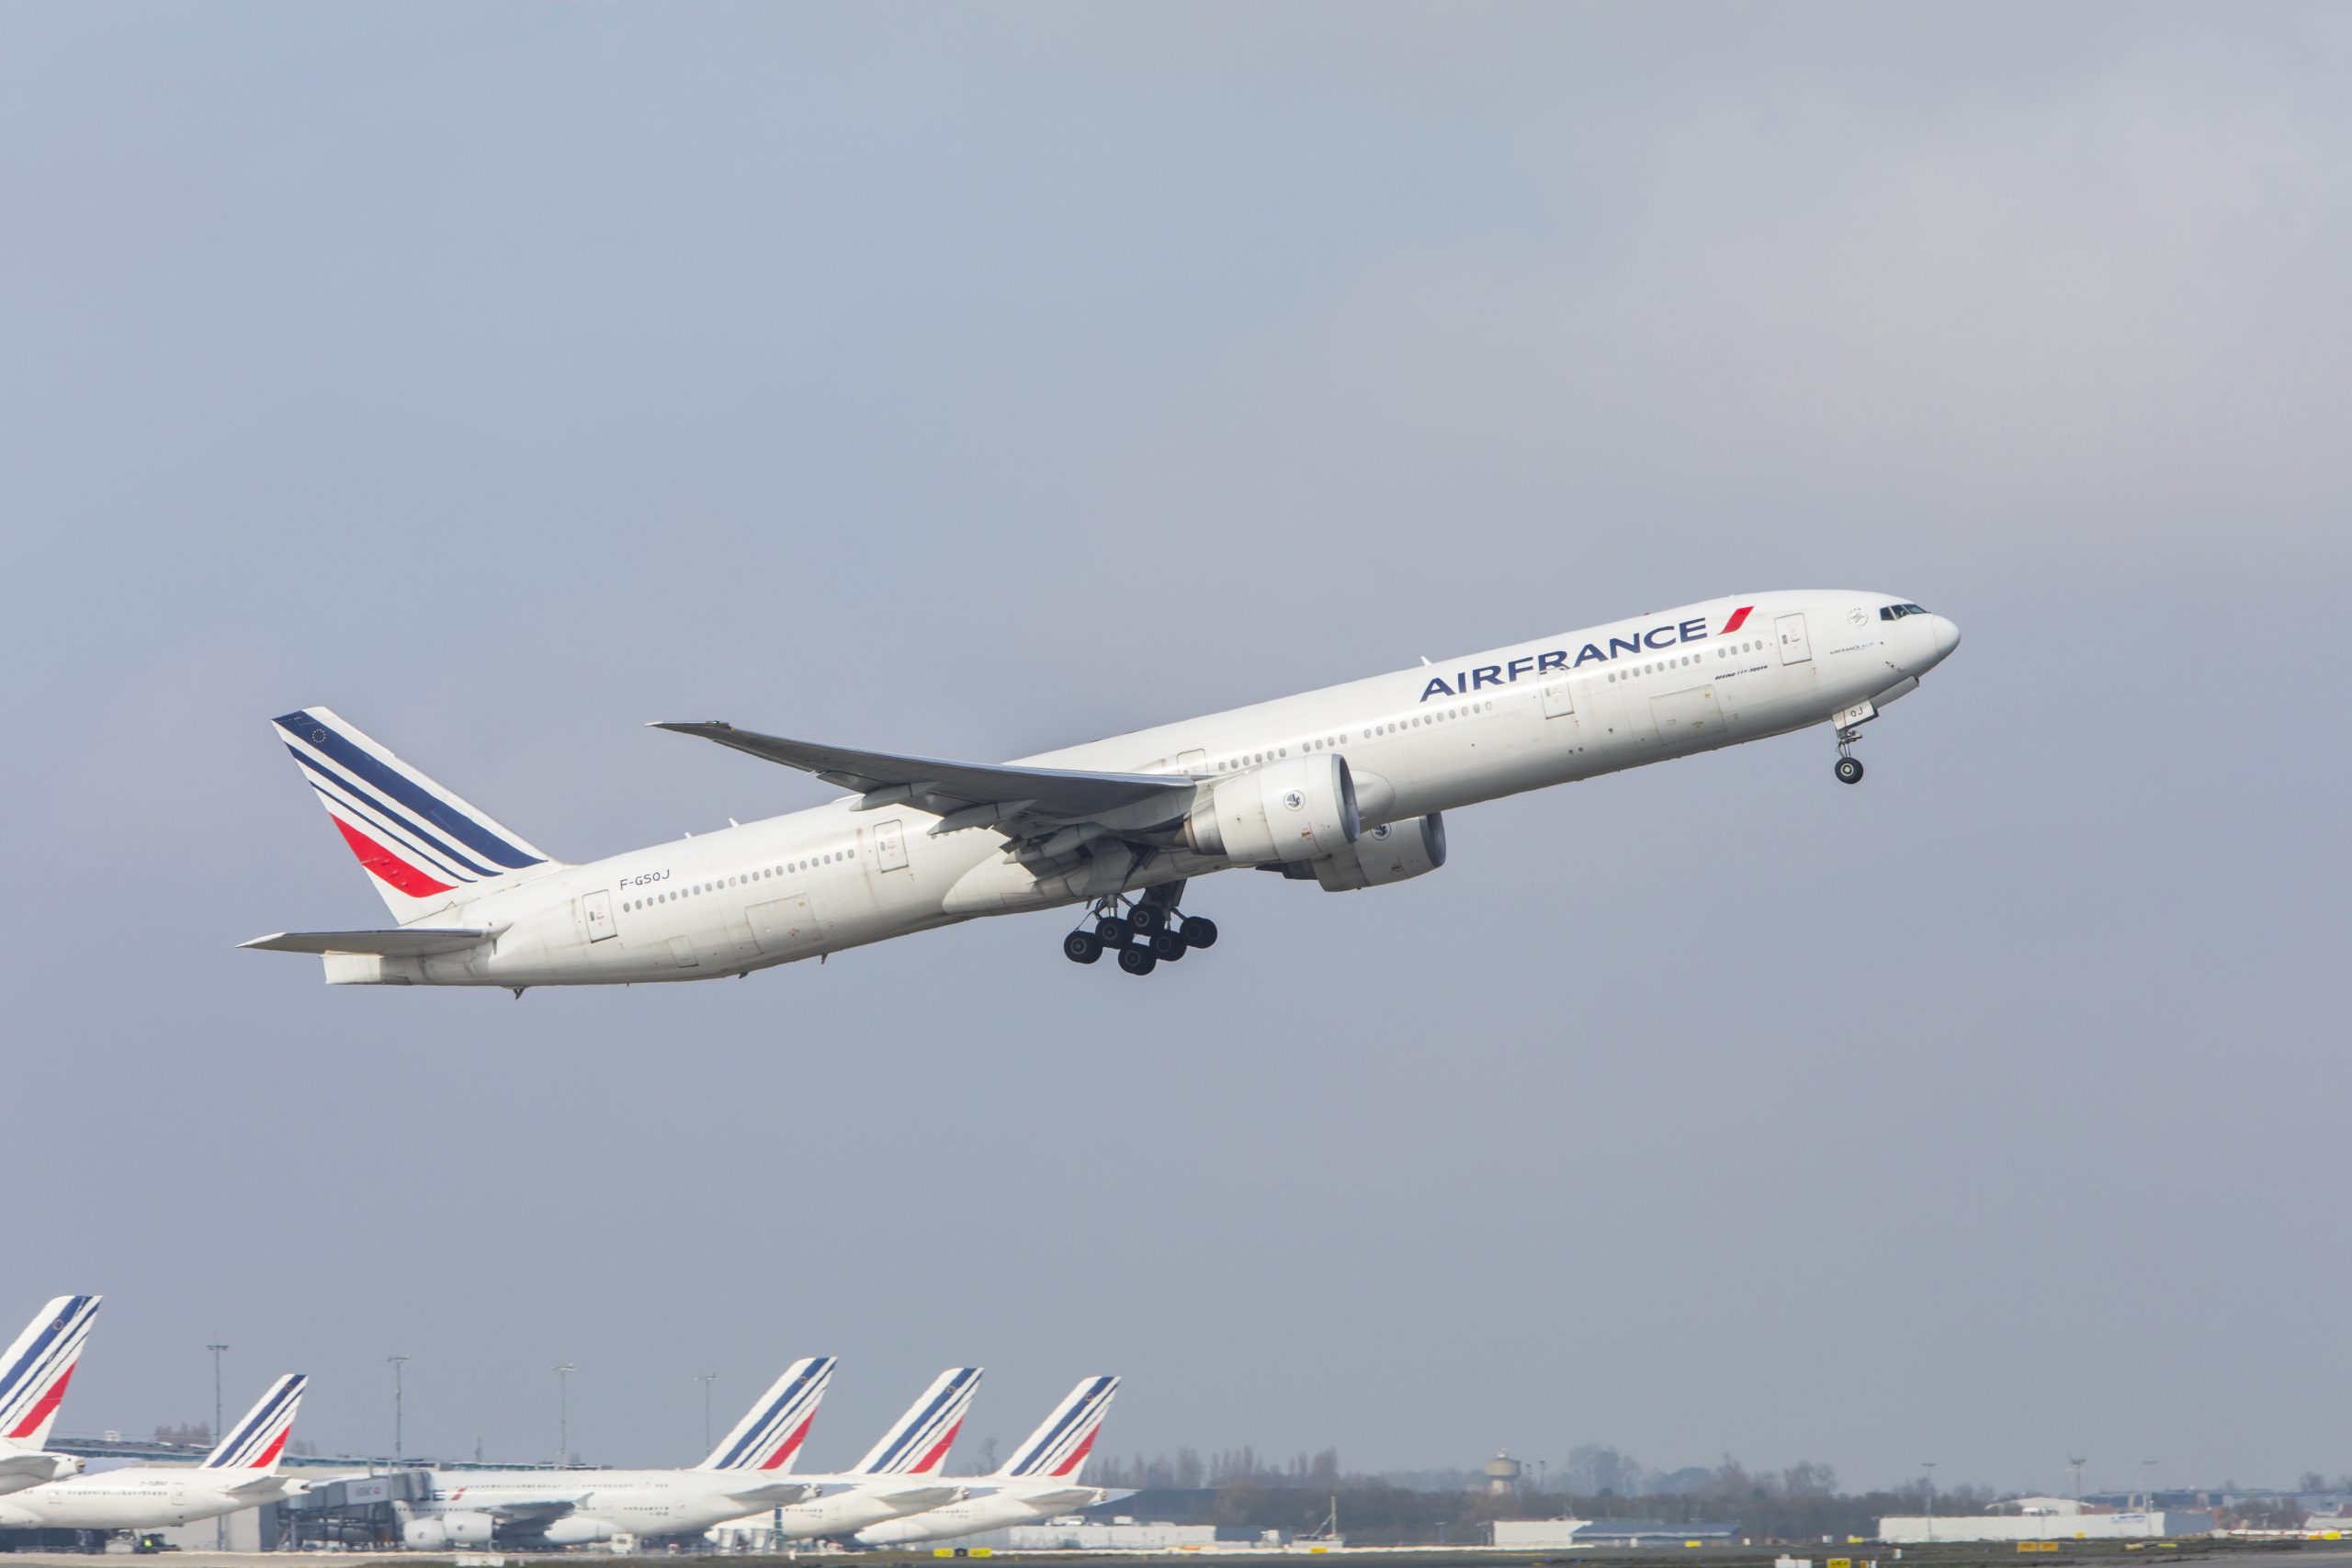 Air France, Official Partner of the Olympic and Paralympic Games Paris 2024